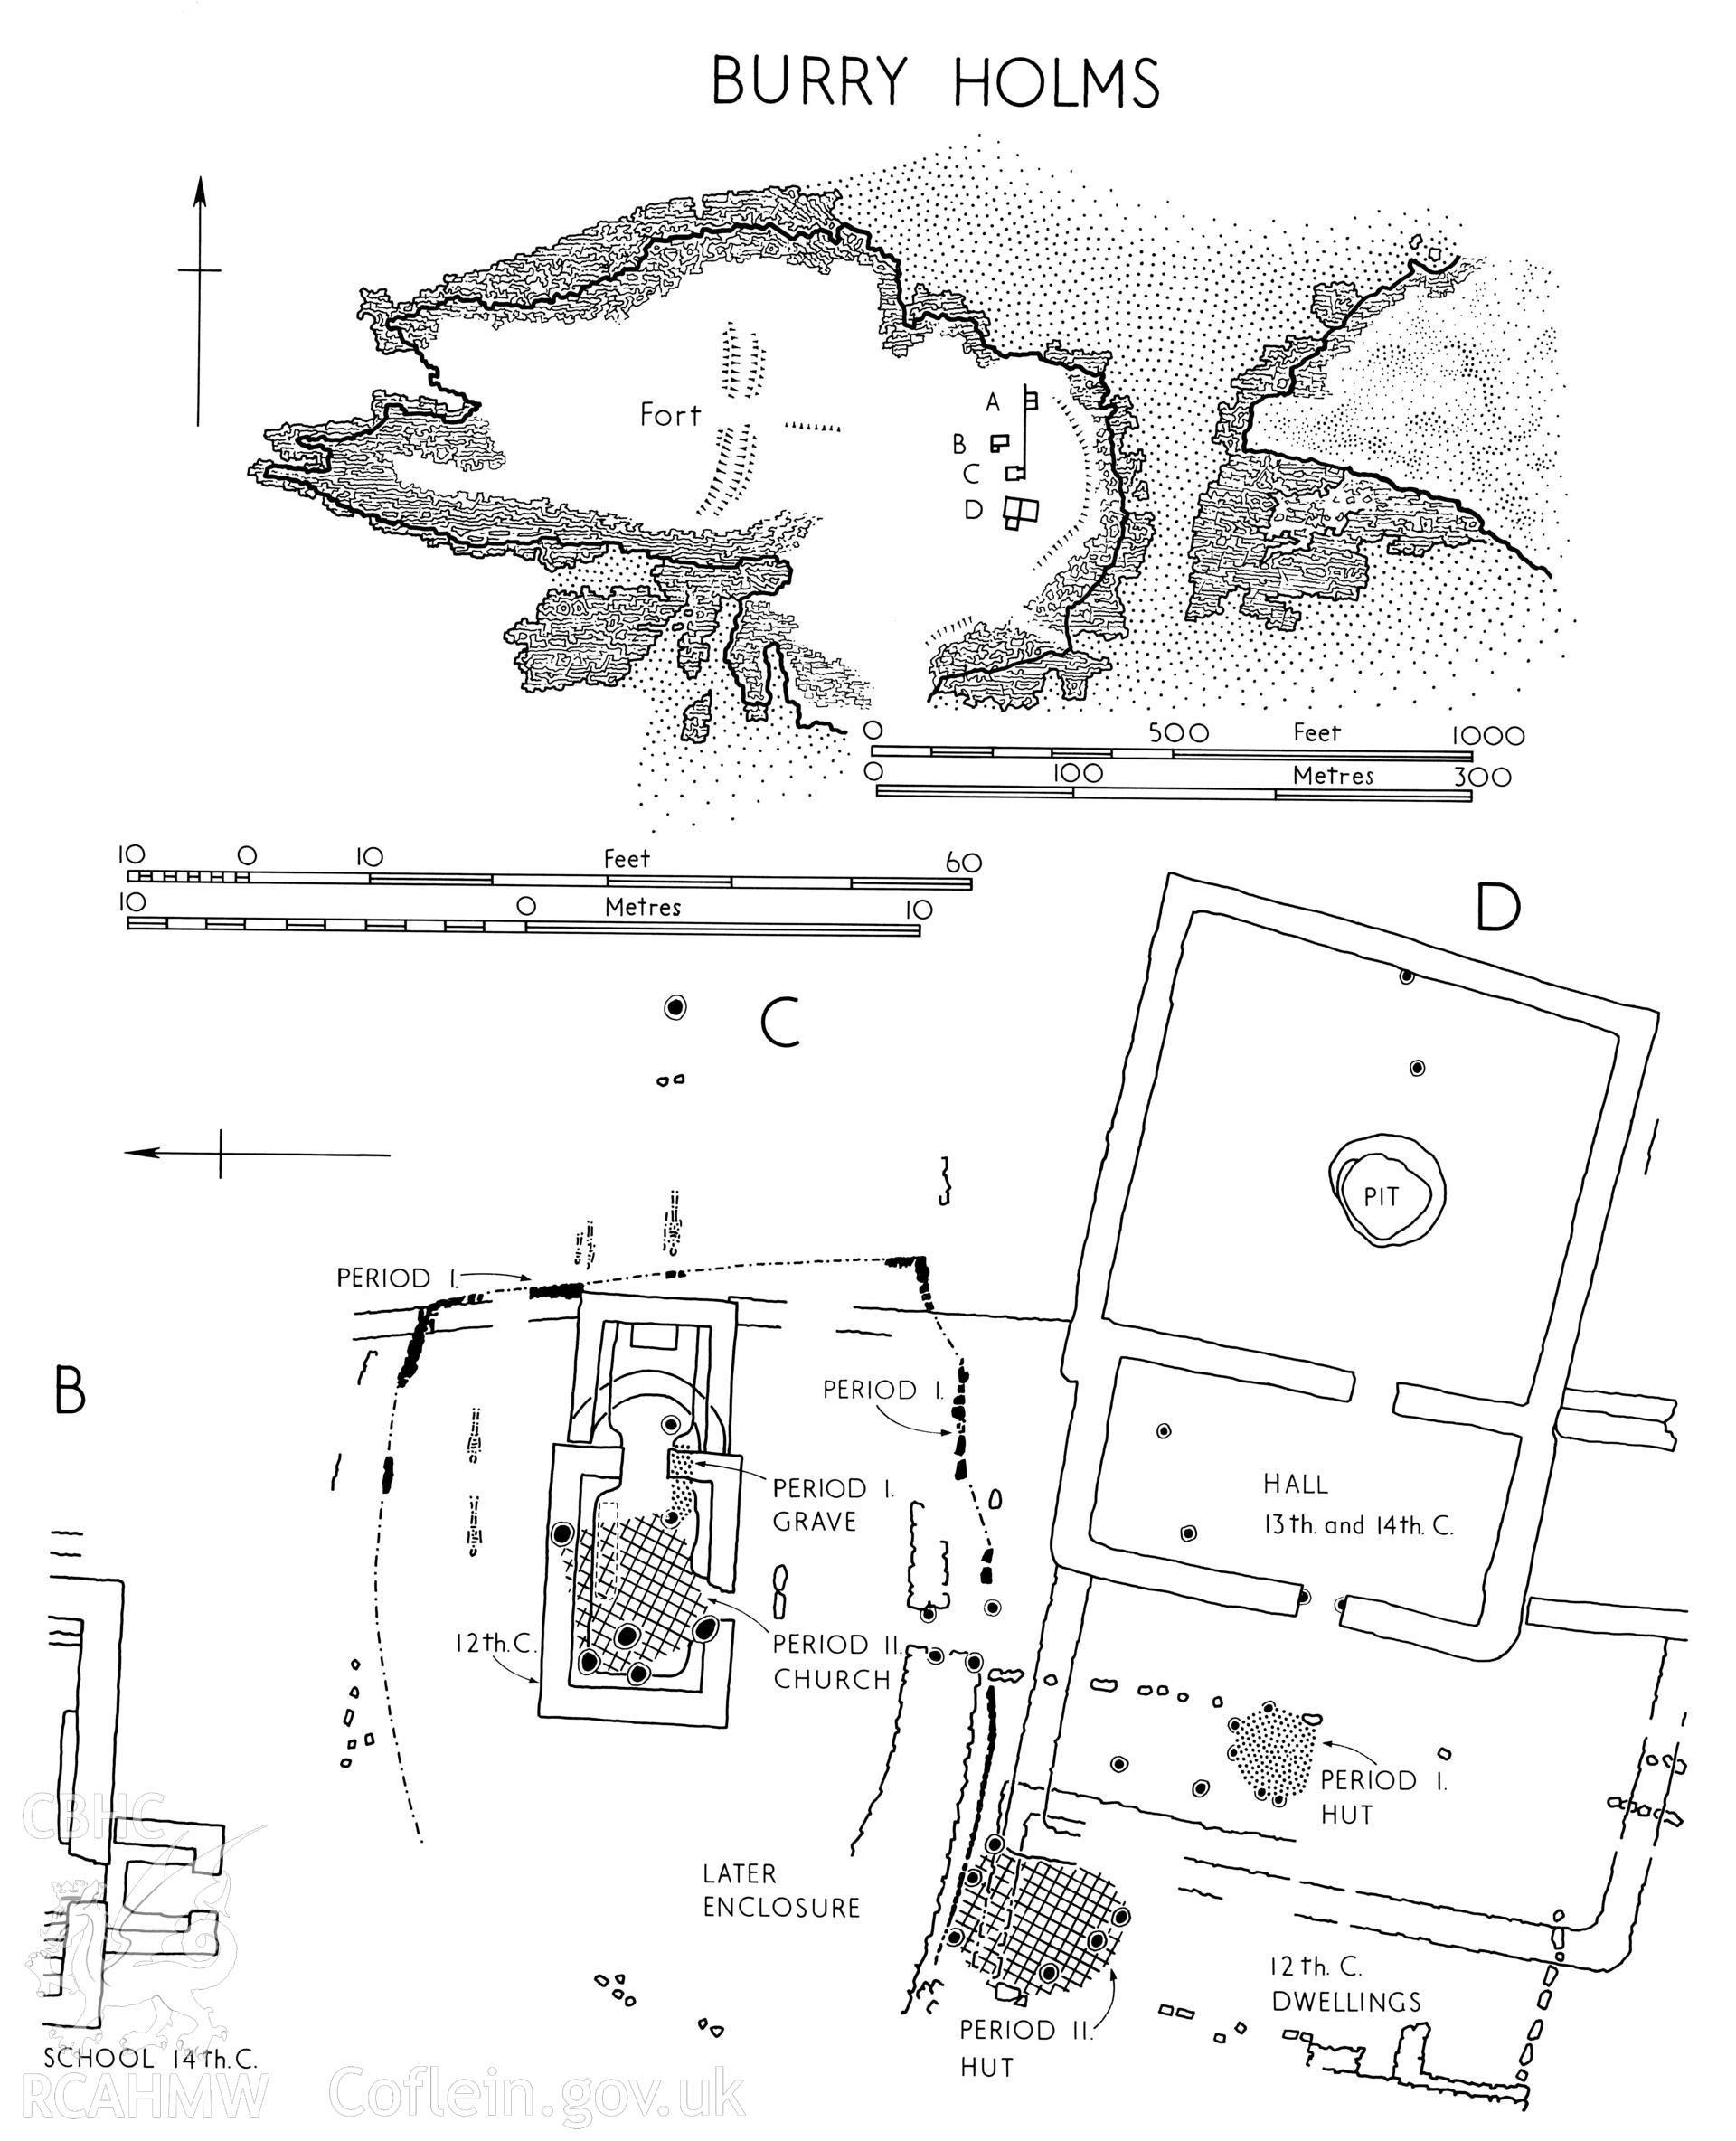 RCAHMW drawing showing plan of Burry Holms Monastic Site, Llangennith, published in Glamorgan I, iii, fig 5.